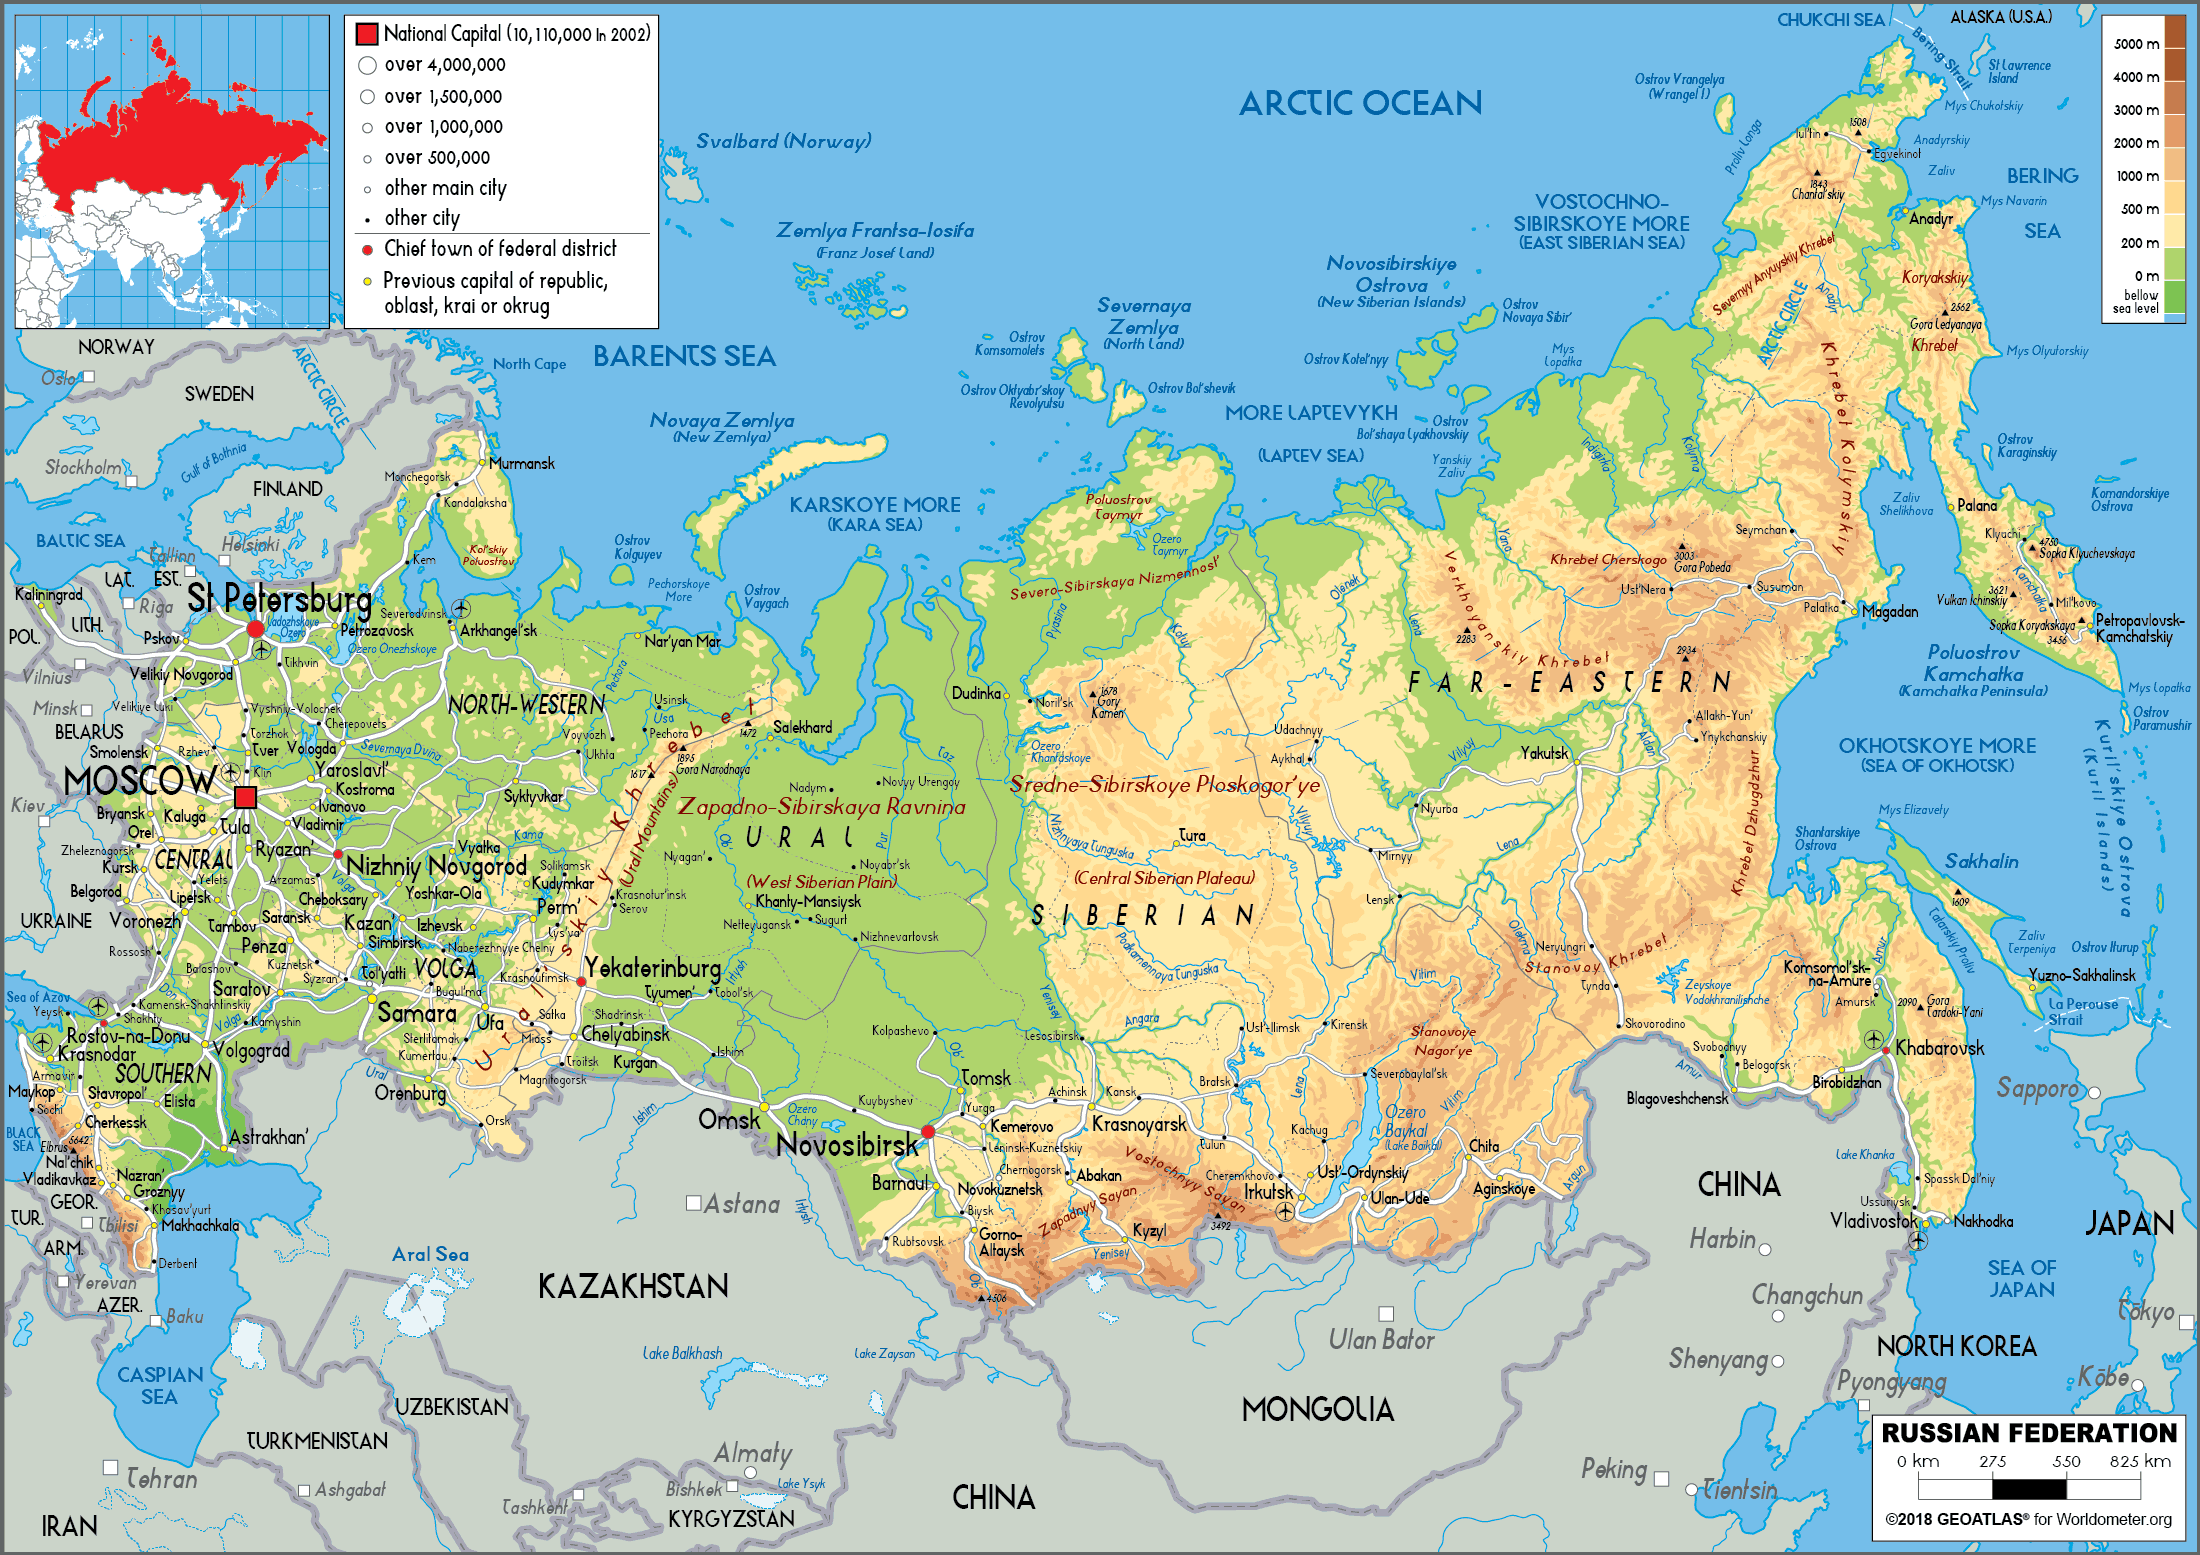 Poltical Map Of Russia - Wilow Kaitlynn